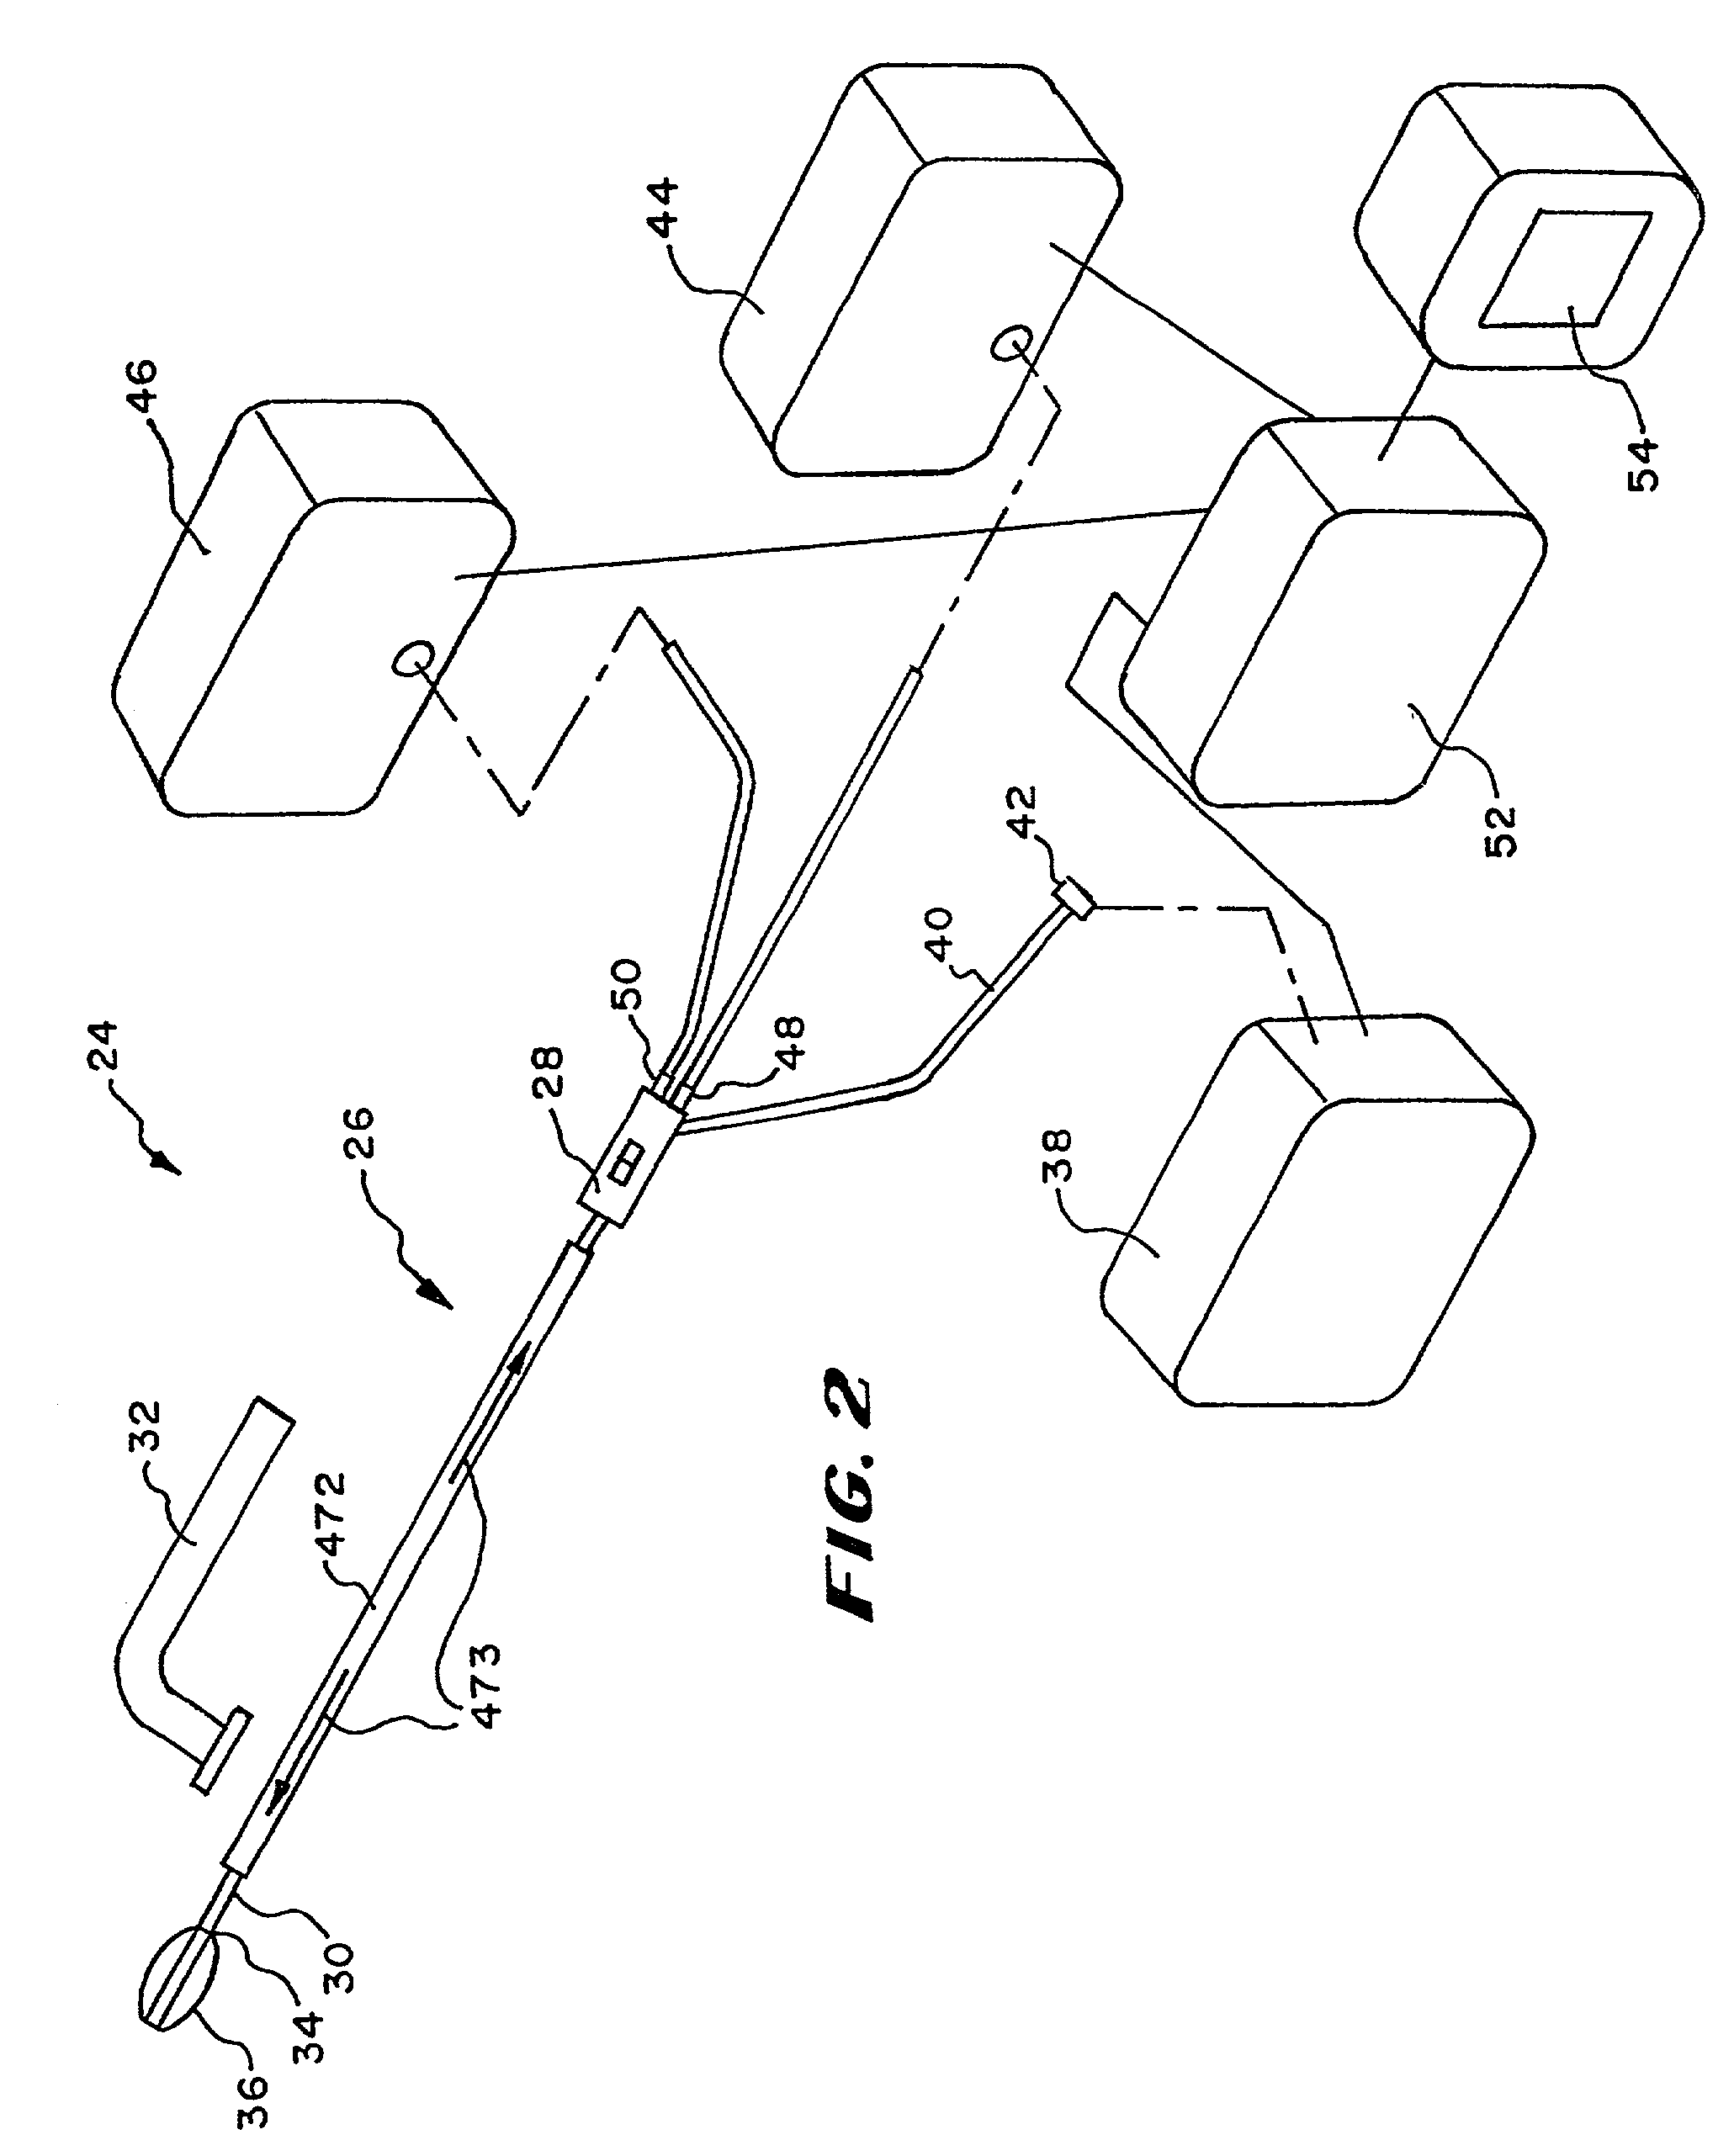 Graphical user interface for association with an electrode structure deployed in contact with a tissue region